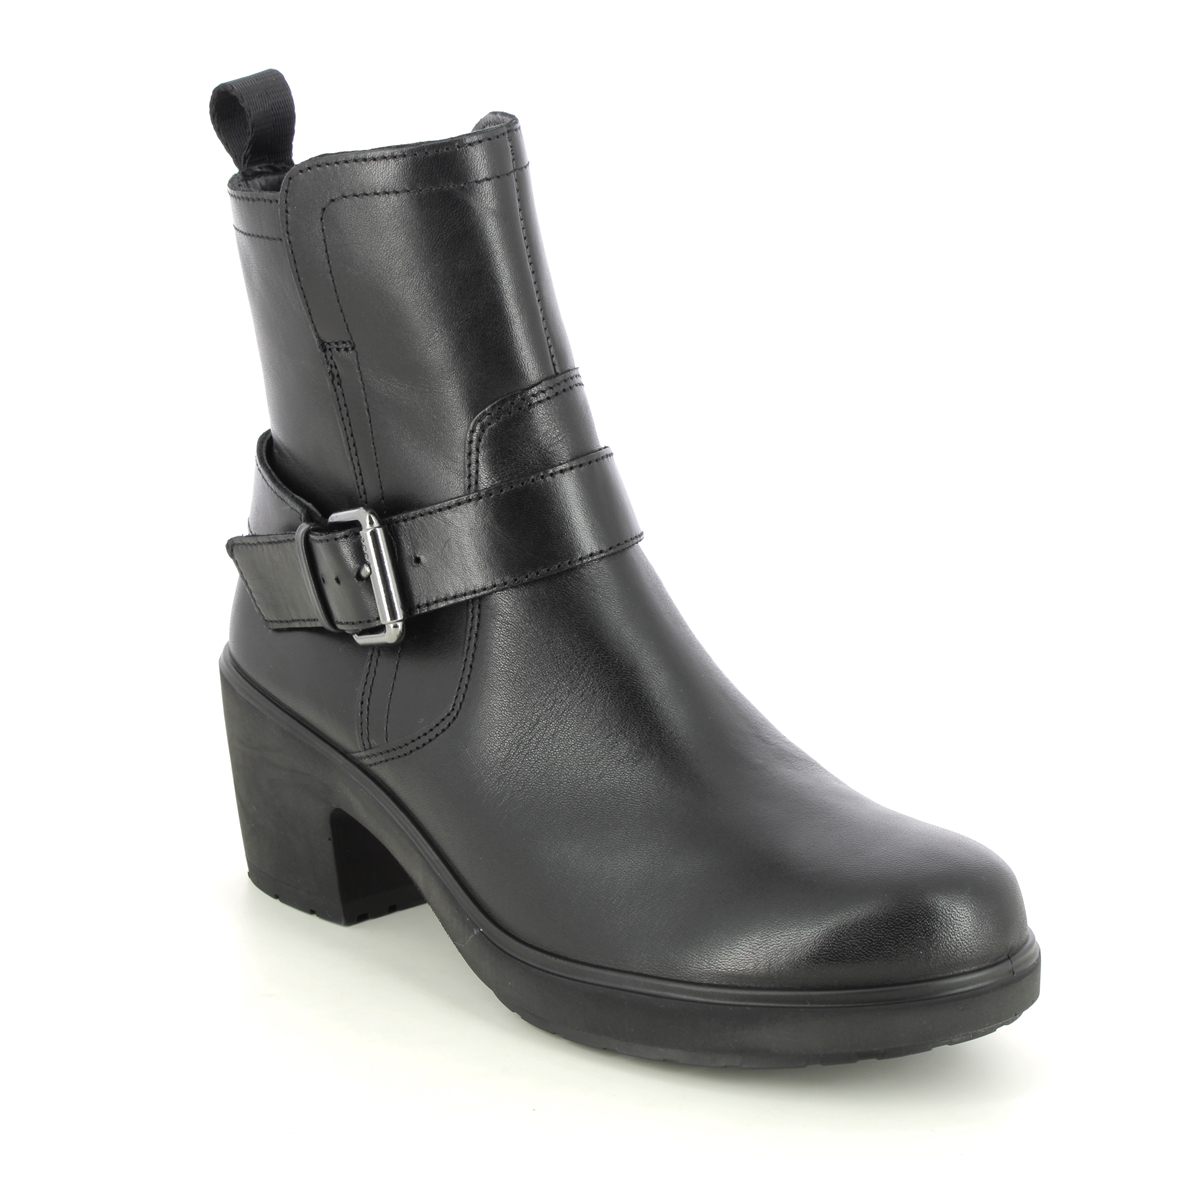 Ecco Zurich Tex Metropole Black Leather Womens Ankle Boots 222203-01001 In Size 36 In Plain Black Leather